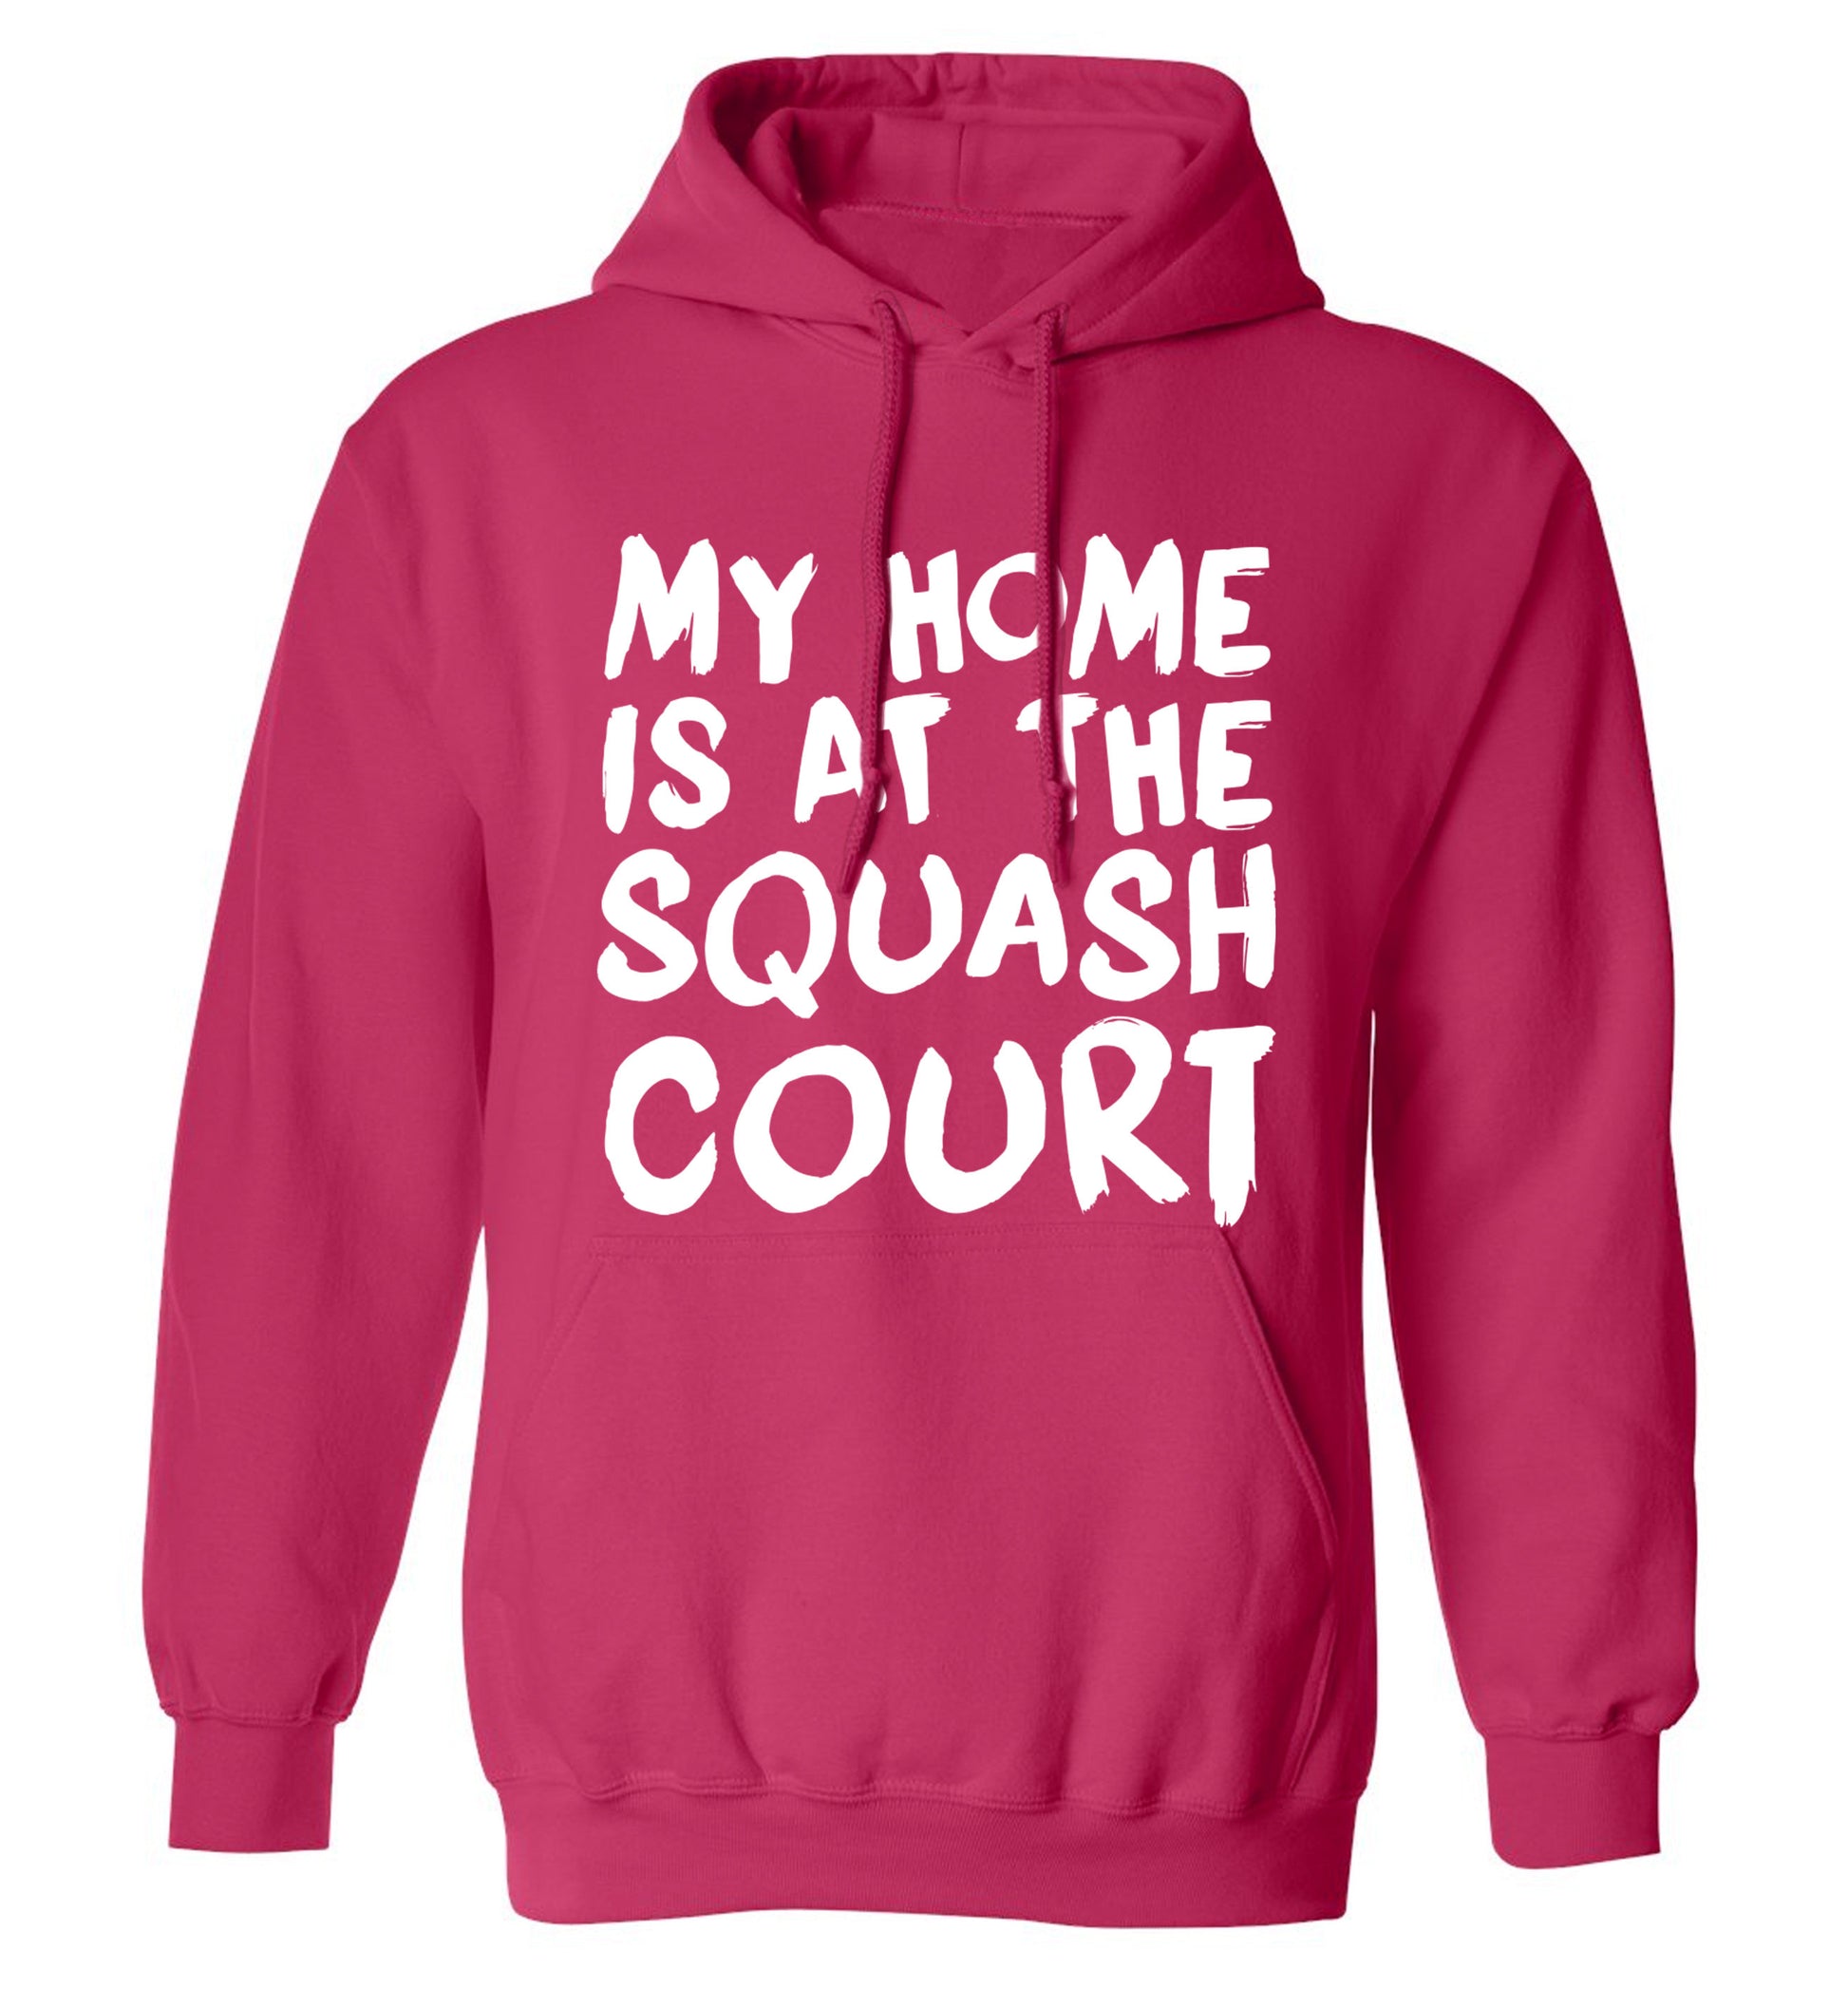 My home is at the squash court adults unisex pink hoodie 2XL